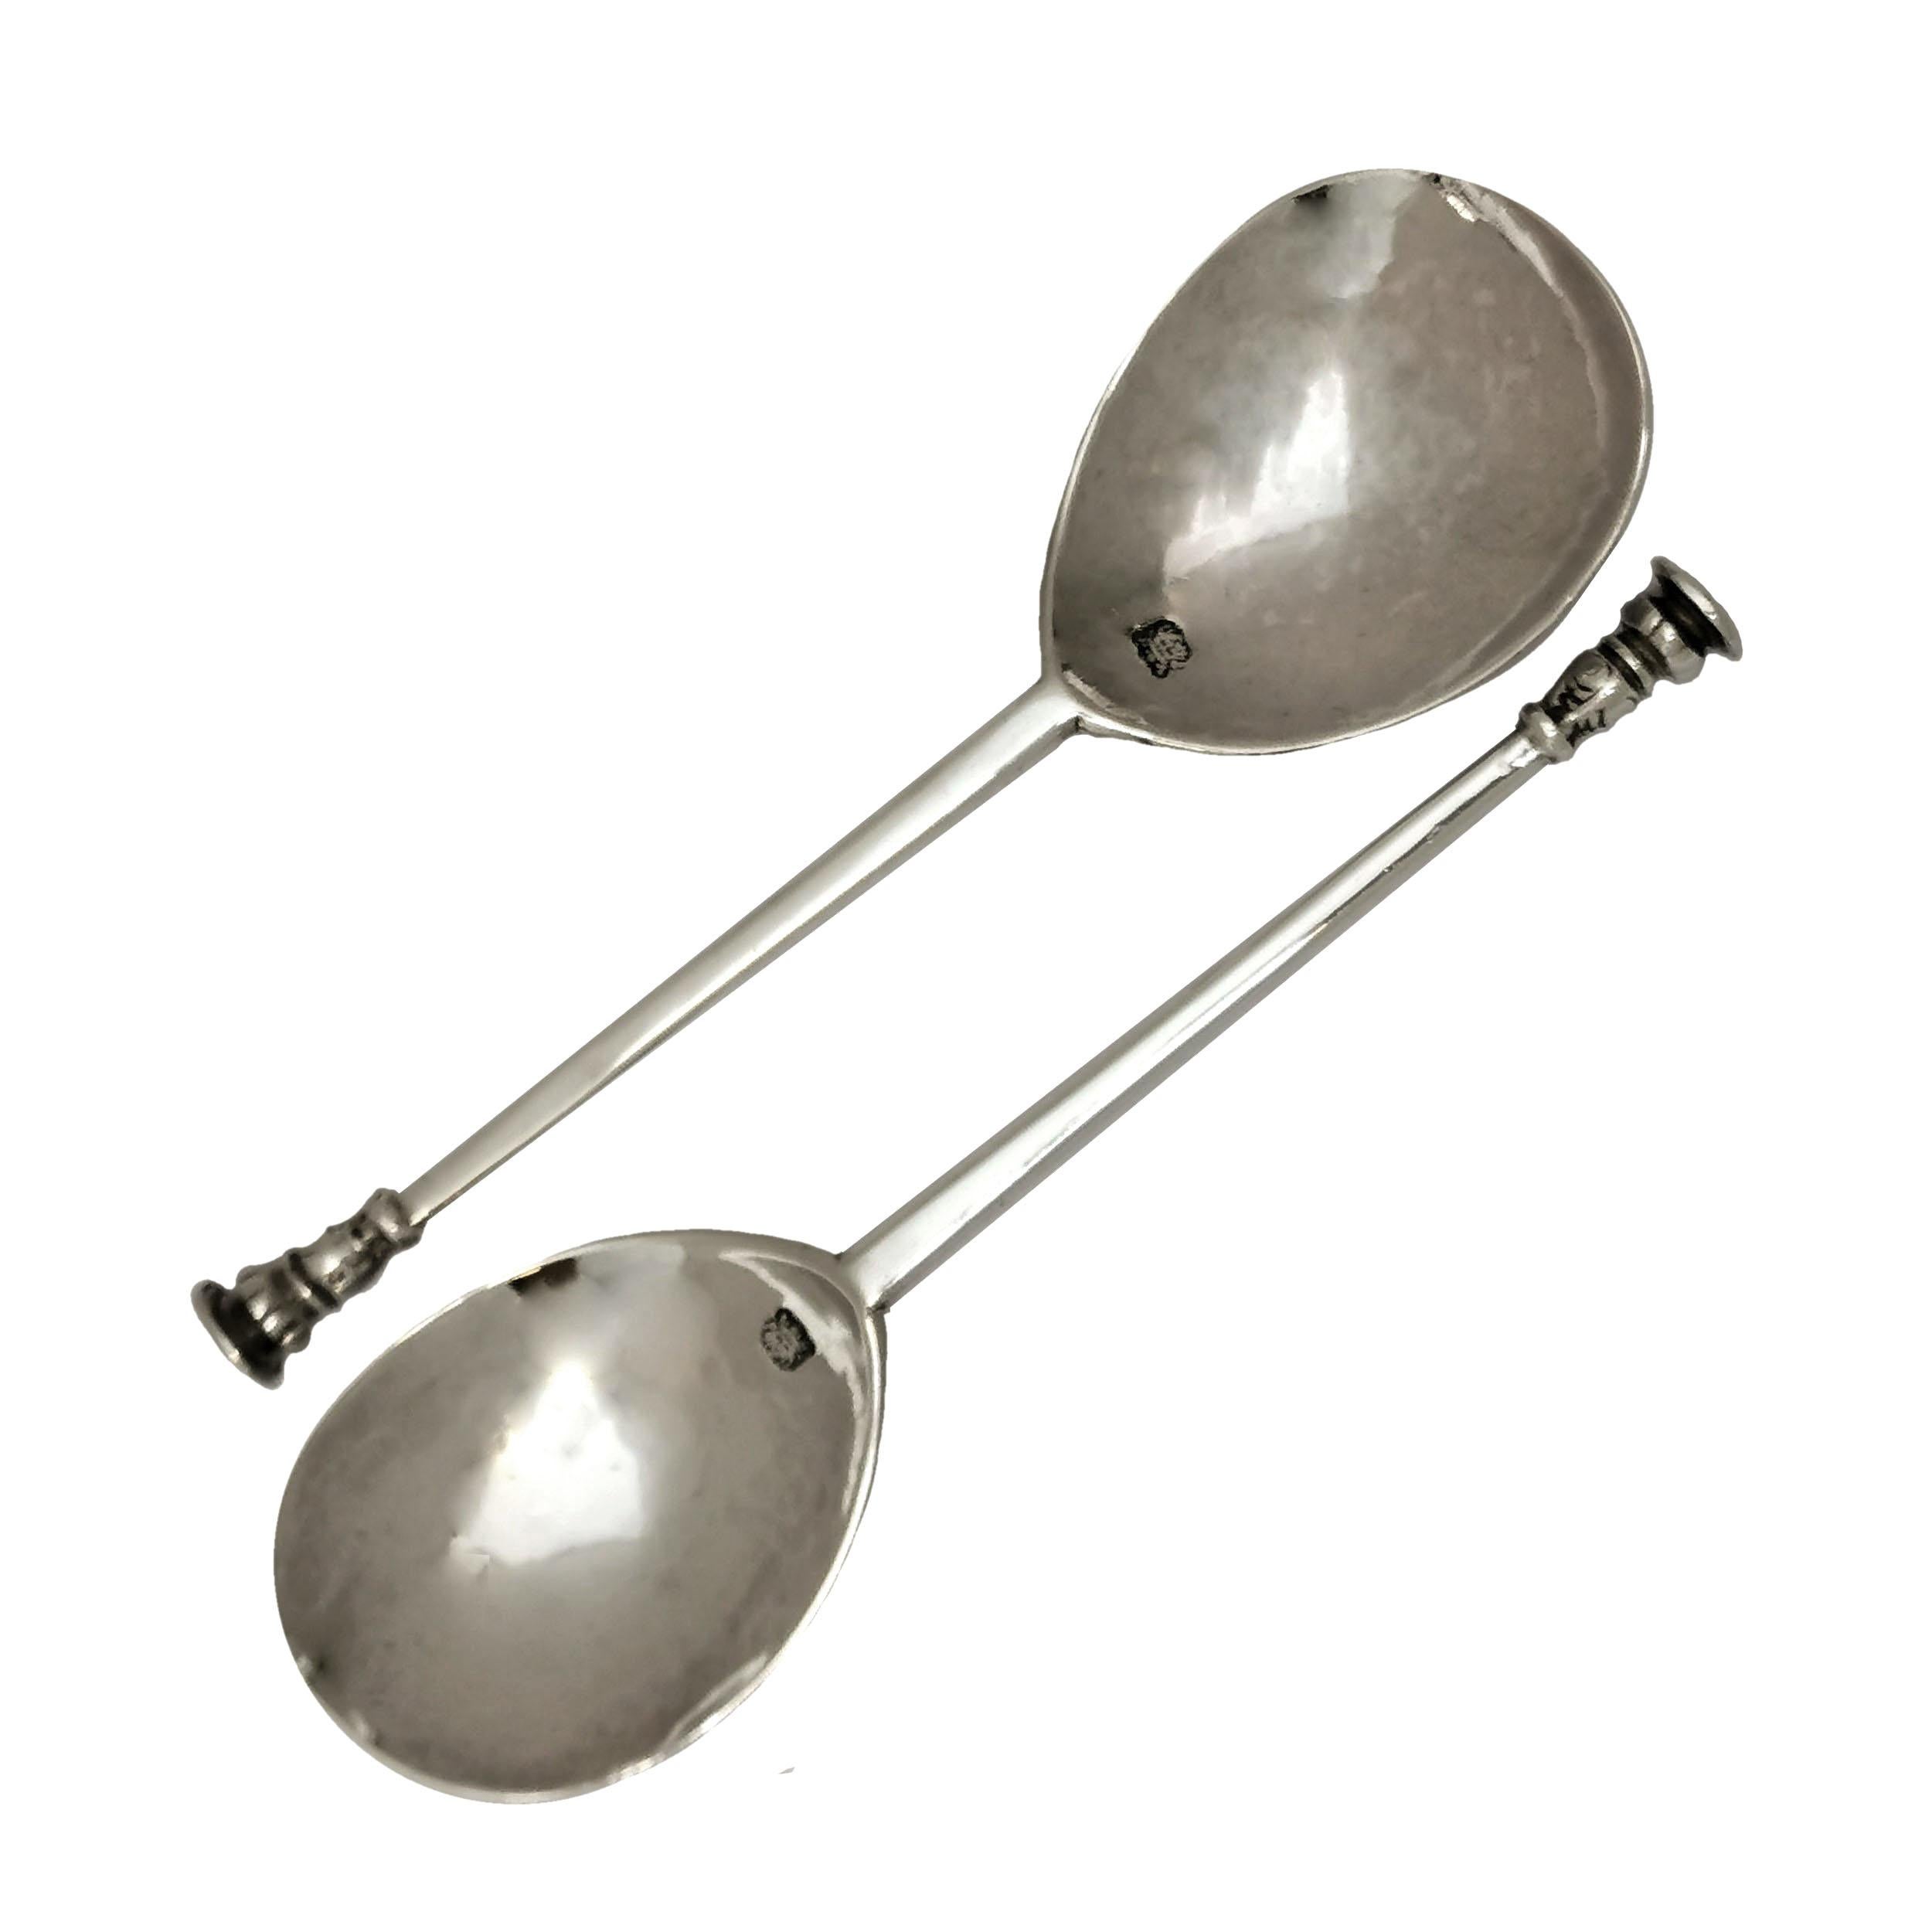 A Pair of classic antique Charles I sterling Silver Seal Topped Spoons with fig shaped bowls and subtly tapered hexagonal handle with knopped seals on the ends. Each Spoon has the crowned leopard of London hallmark stamped in the bowl and the